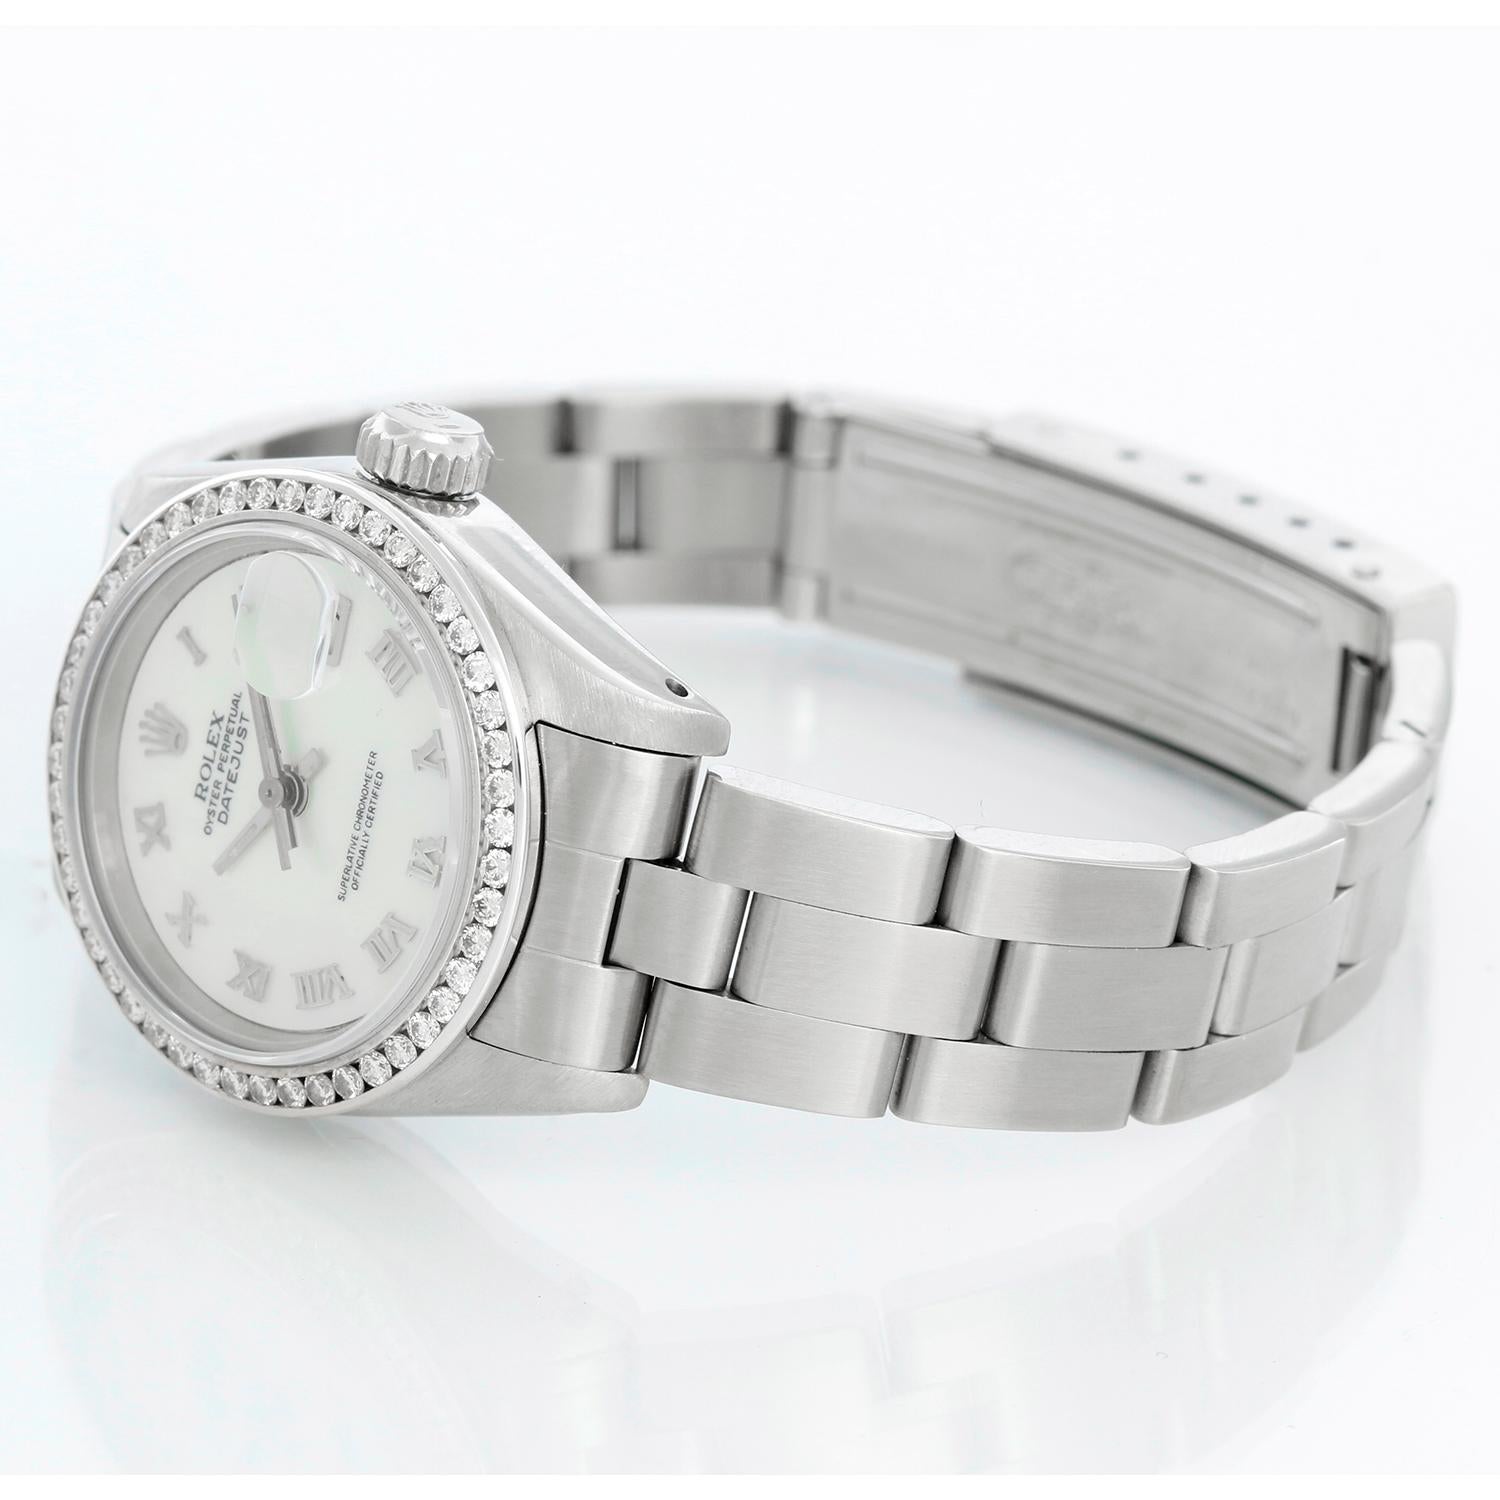 Rolex Ladies Datejust Stainless Steel Watch 69174 - Automatic winding. Stainless steel case with custom diamond bezel ( 26 mm ) . Custom Mother of pearl Roman dial. Stainless Steel oyster band. Pre-owned with custom box.